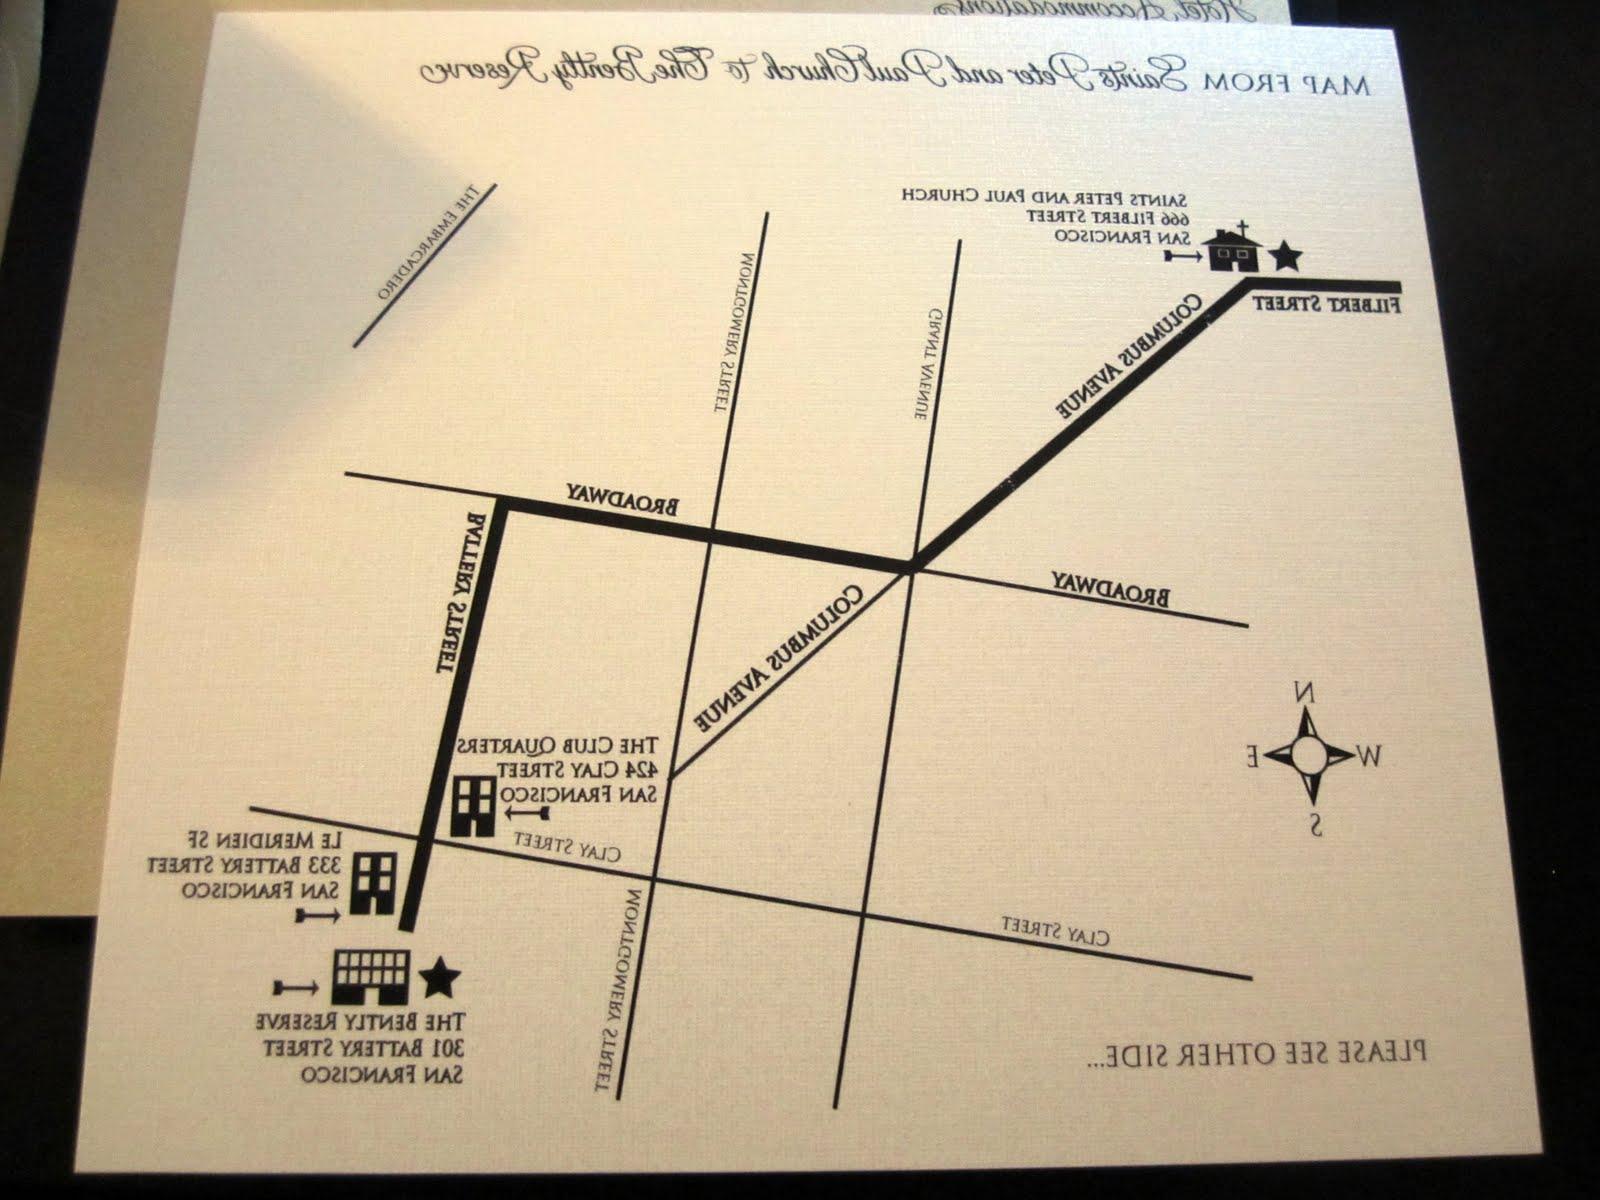 The map directions card